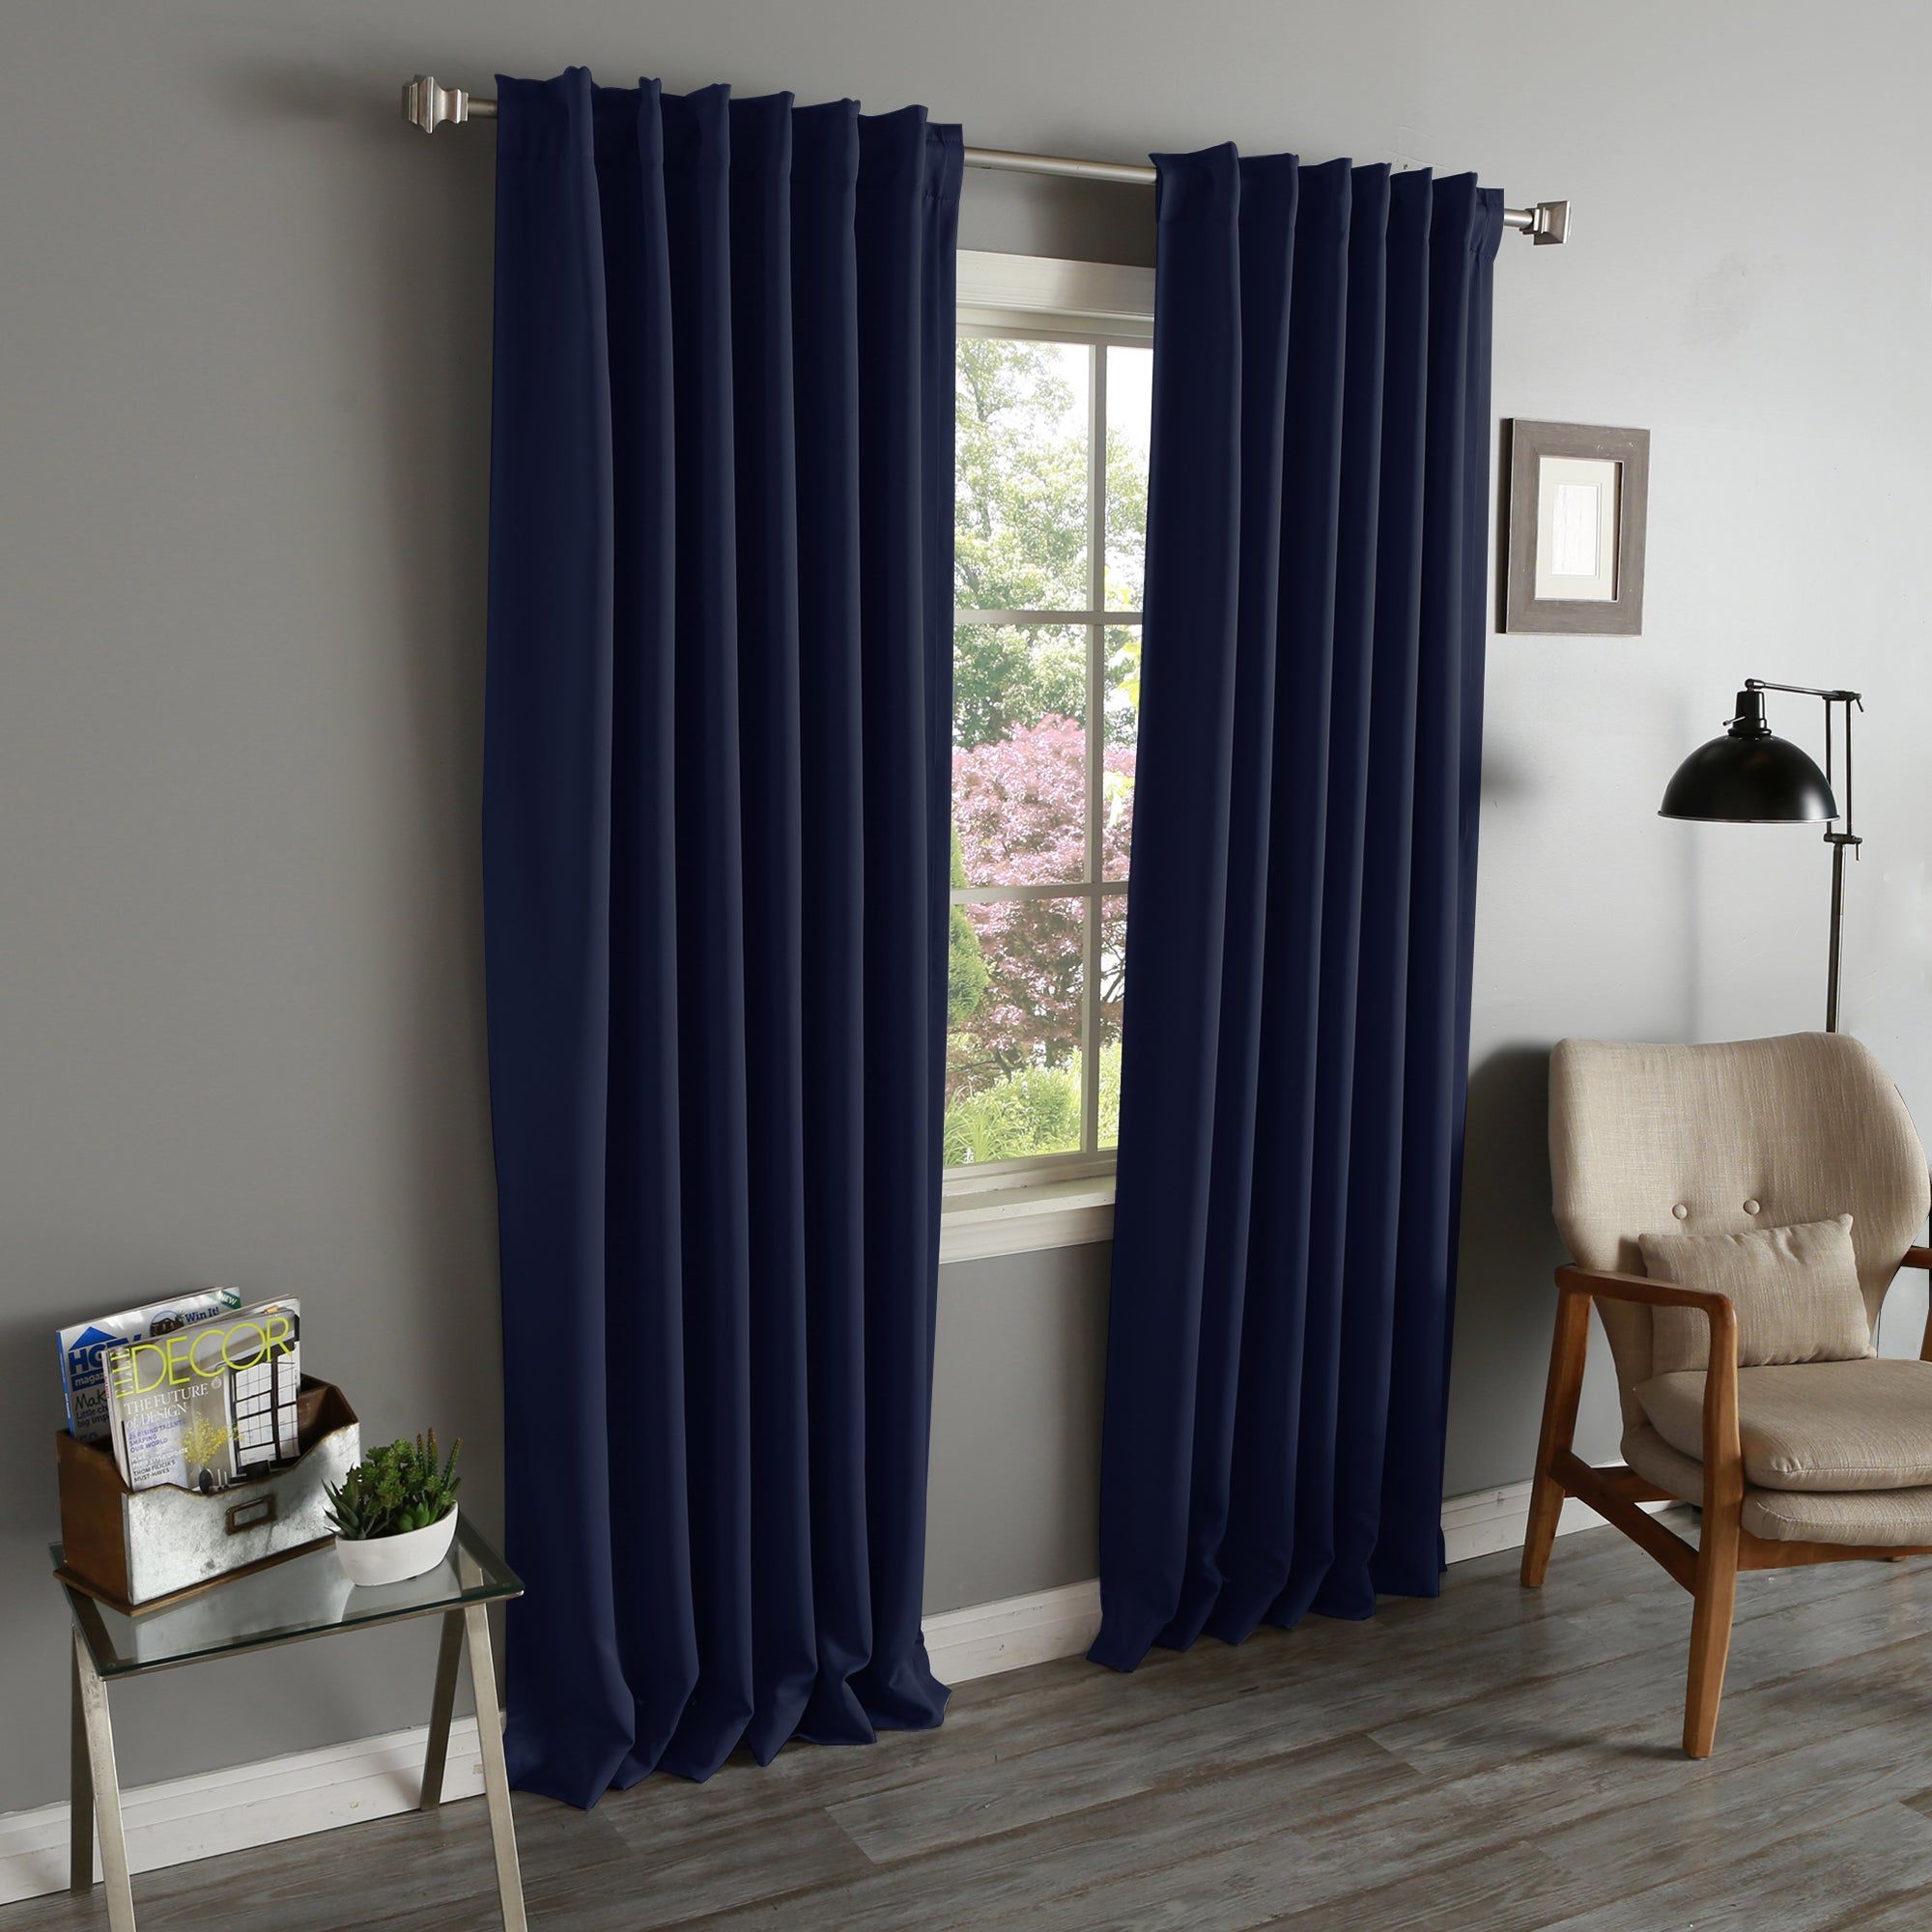 Aurora Home Solid Insulated Thermal Blackout Long Length Curtain Panel Pair Pertaining To Solid Insulated Thermal Blackout Long Length Curtain Panel Pairs (View 5 of 30)